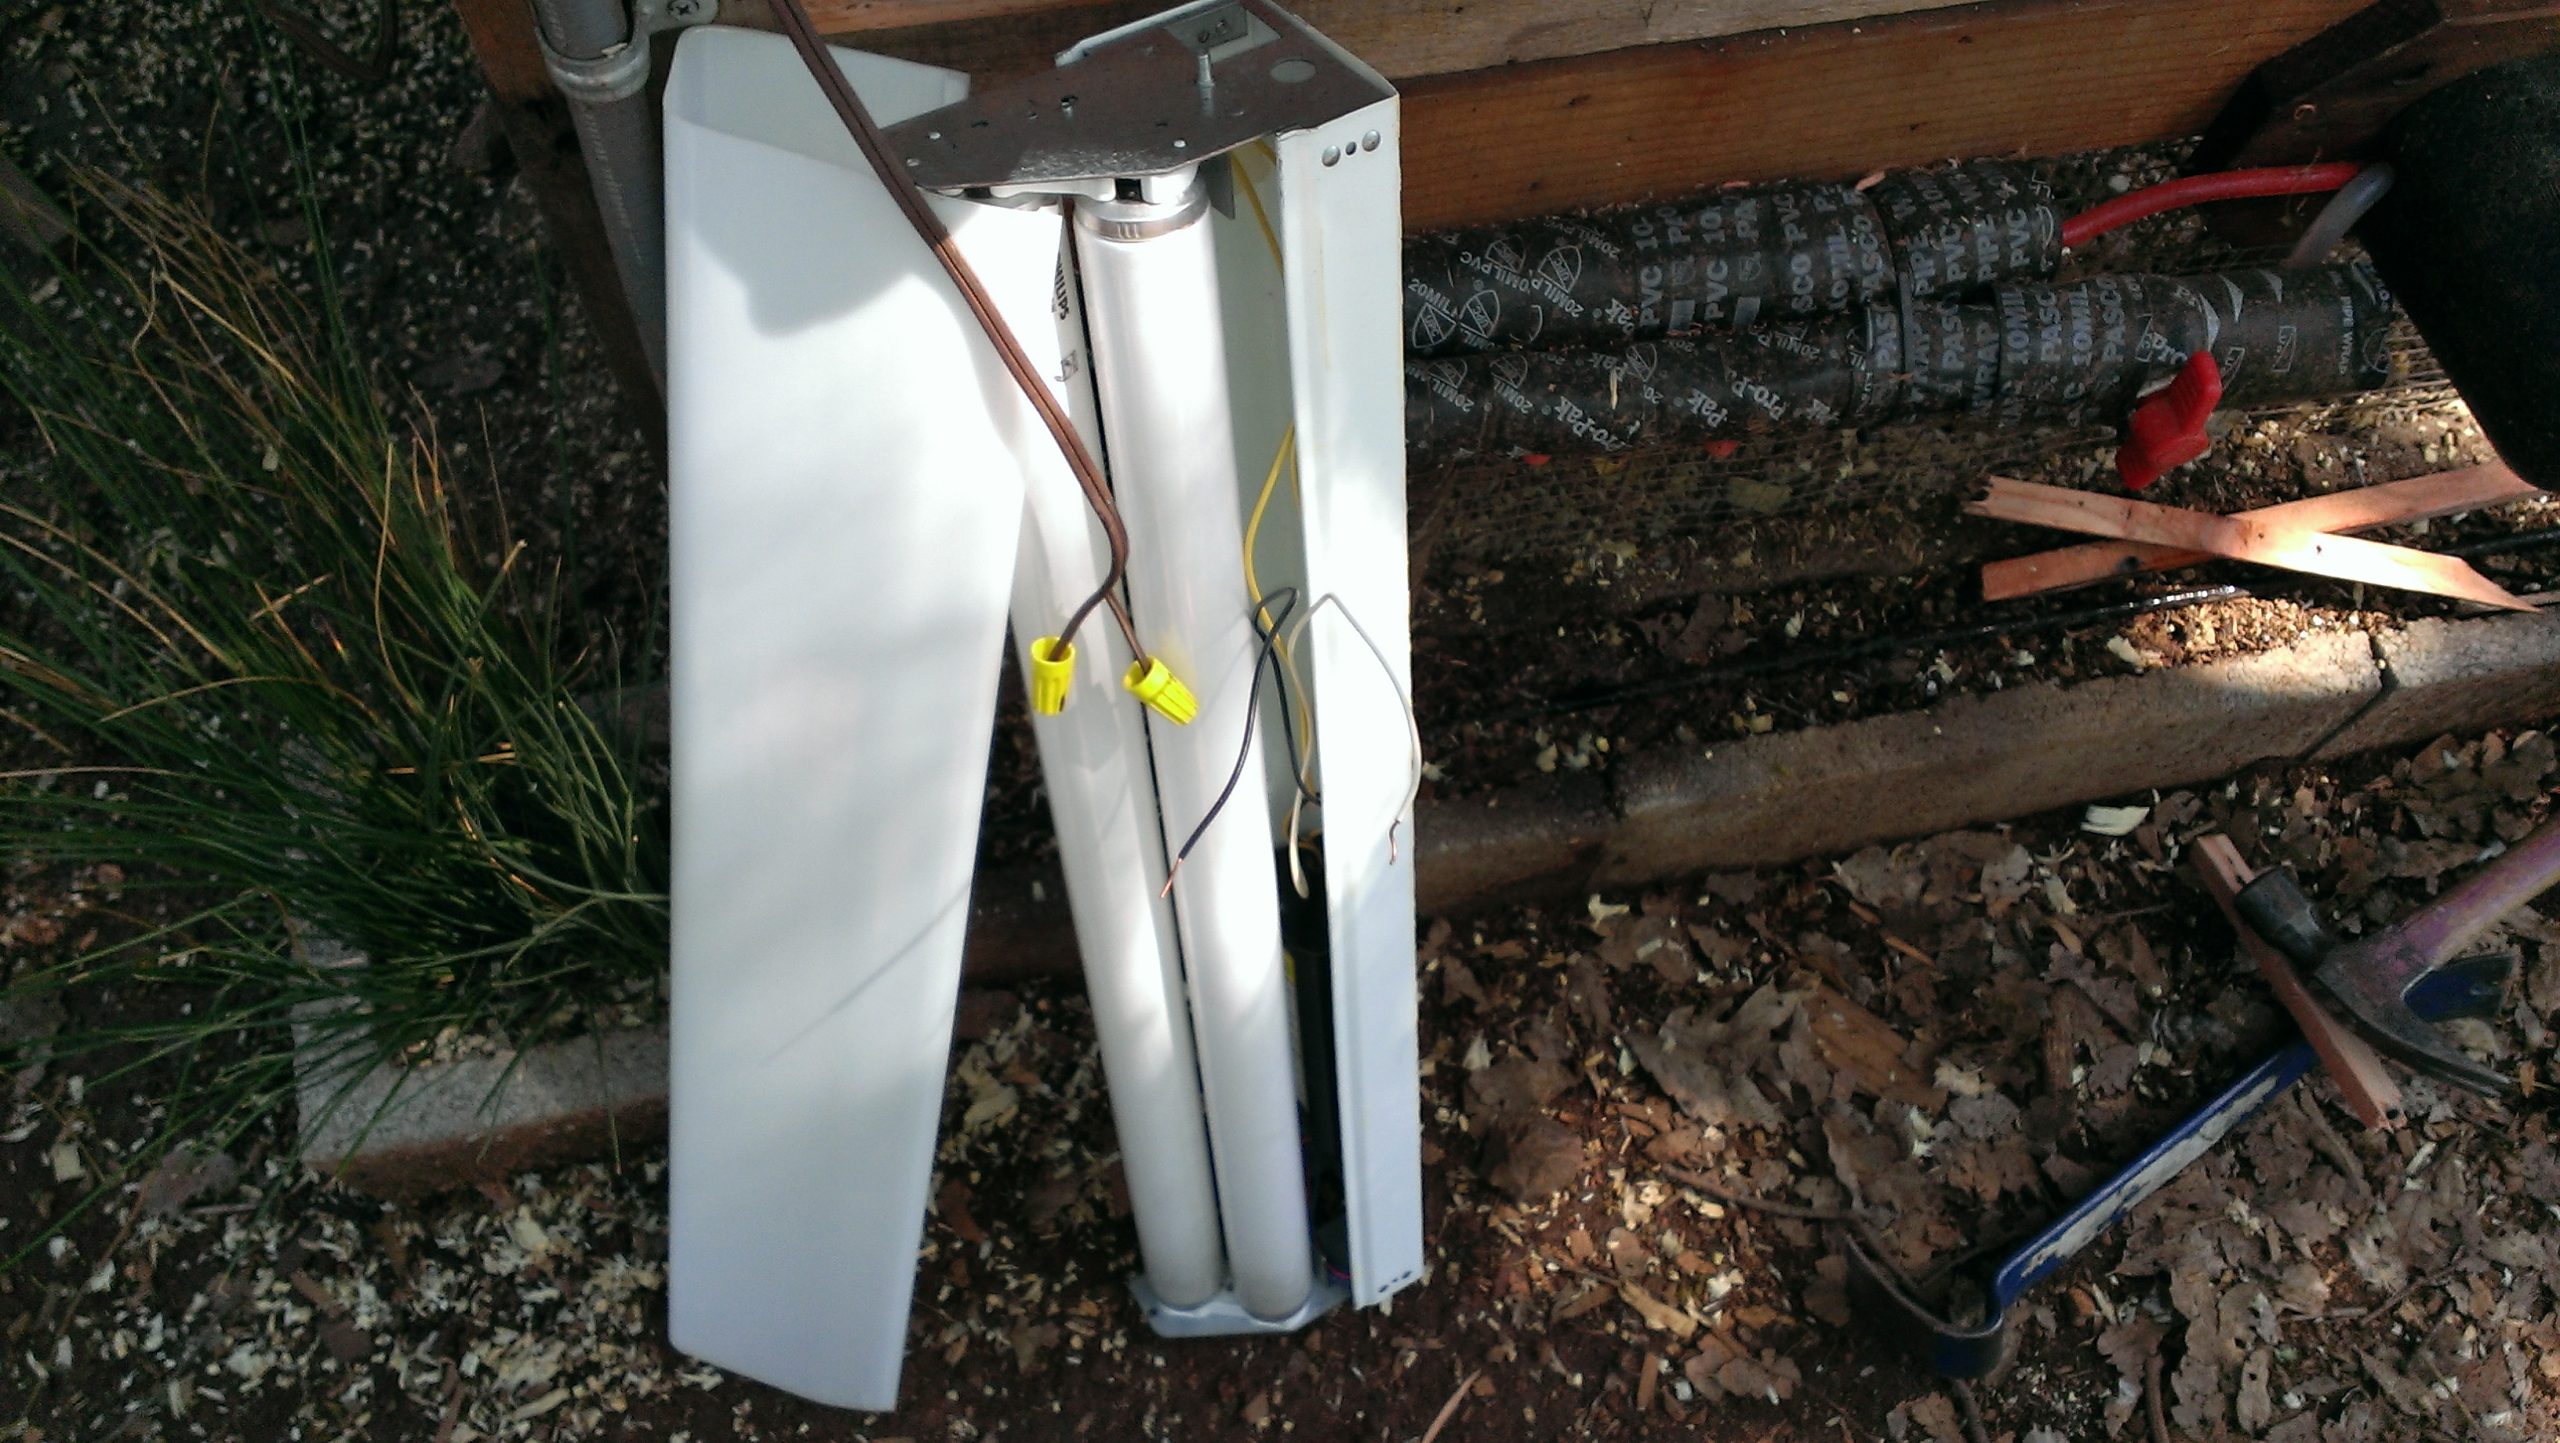 Wiring Chicken Coop Heater (shop light with cover off) - Construction Exterior Pipe Protection (mounted under stairs and above wrapped pipe)